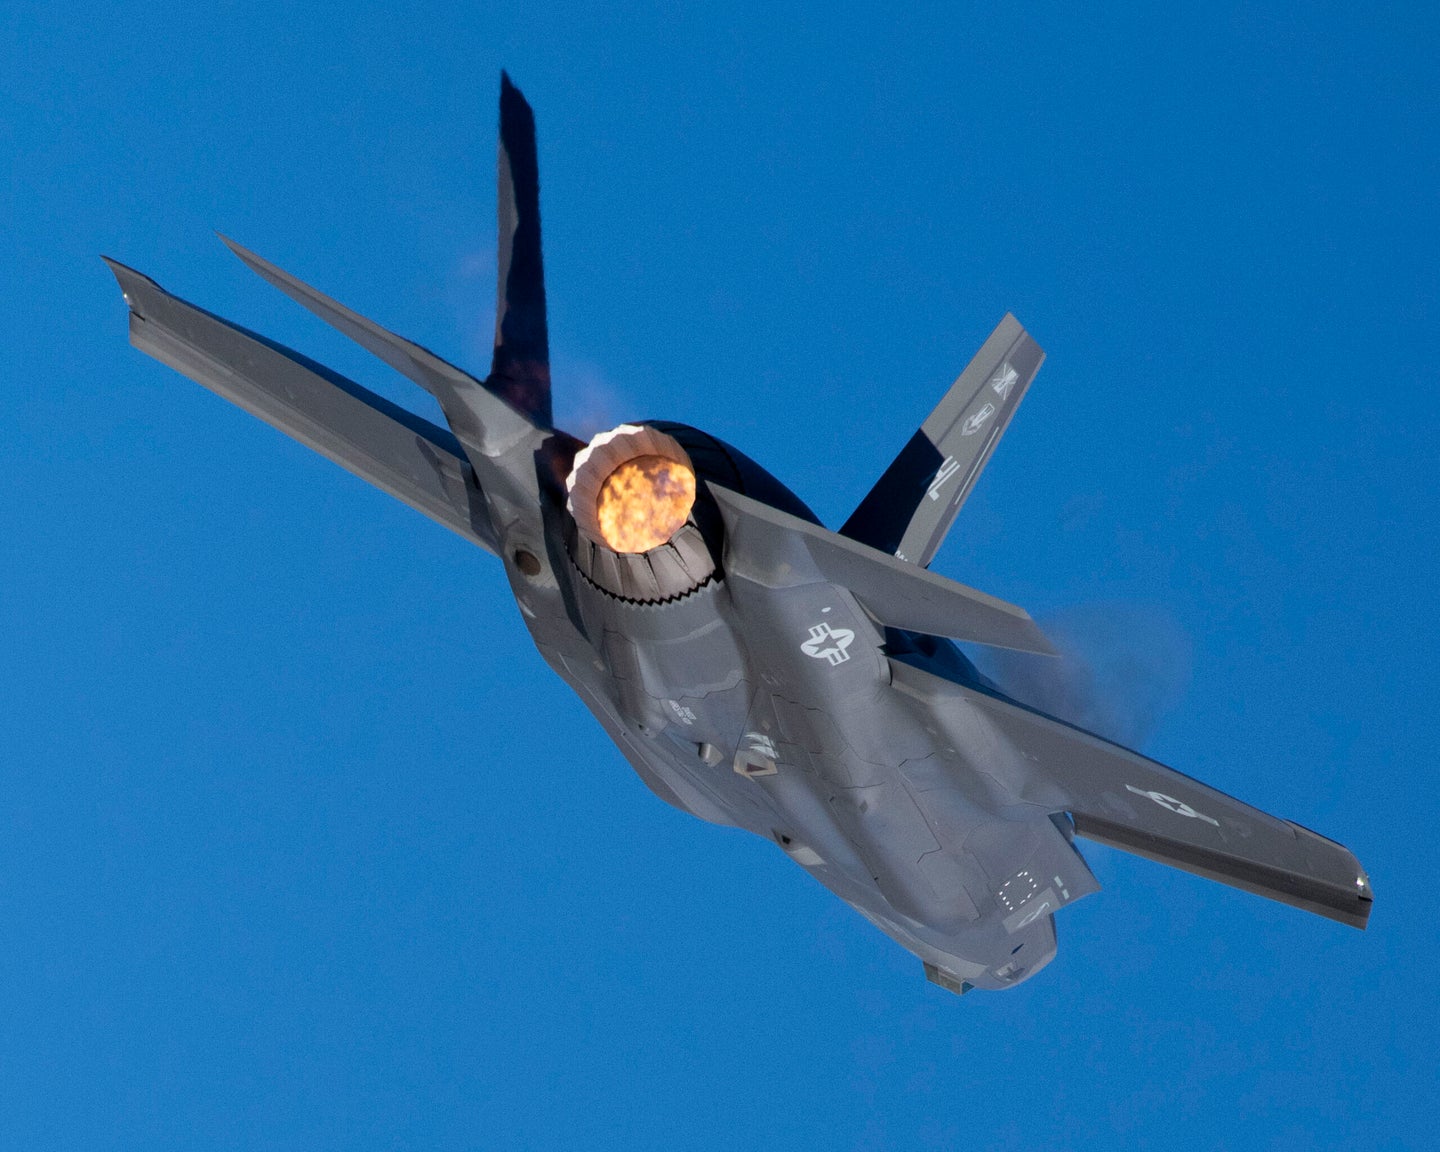 A flashlight left inside an F-35’s engine during maintenance work led to $14 million in damages at Luke Air Force Base in Arizona, according to Air Force officials. Air Force photo by Tech. Sgt. Ryan Crane.